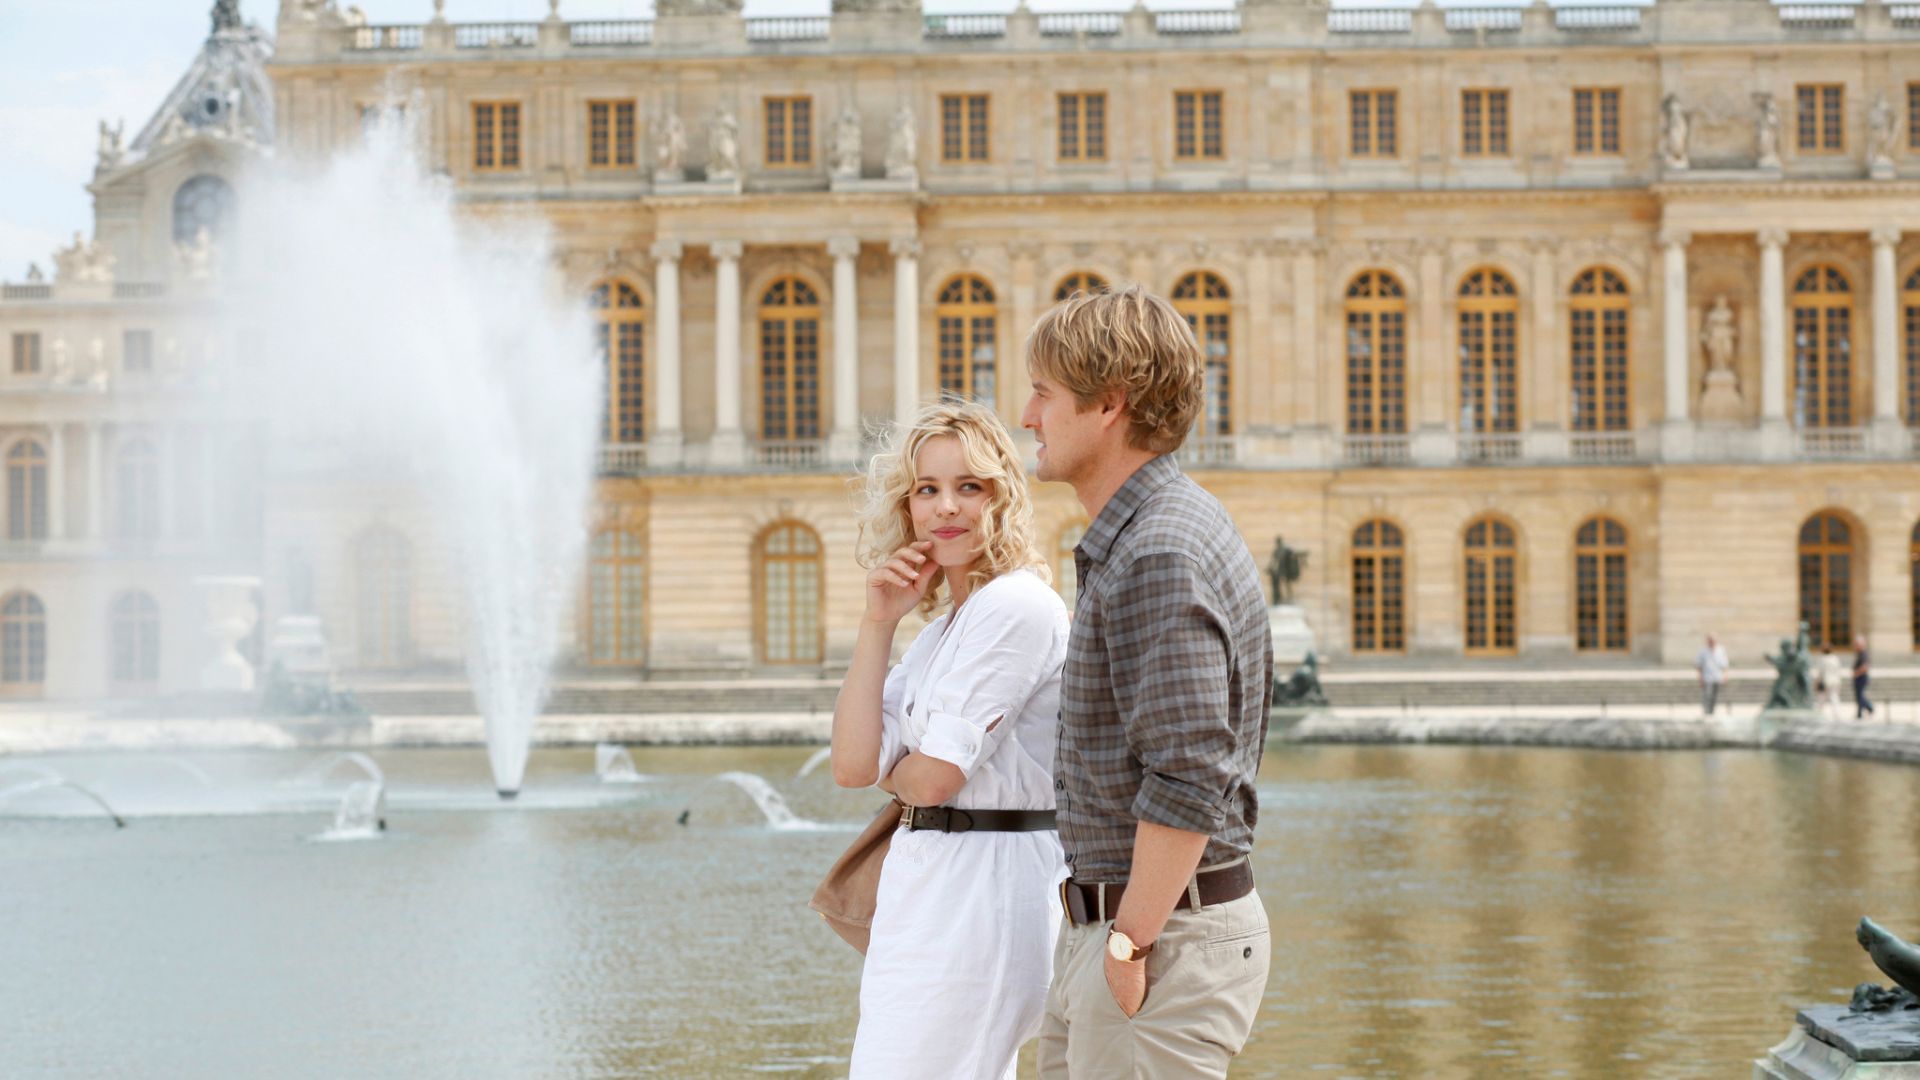 Movies every architect must watch: Midnight in Paris